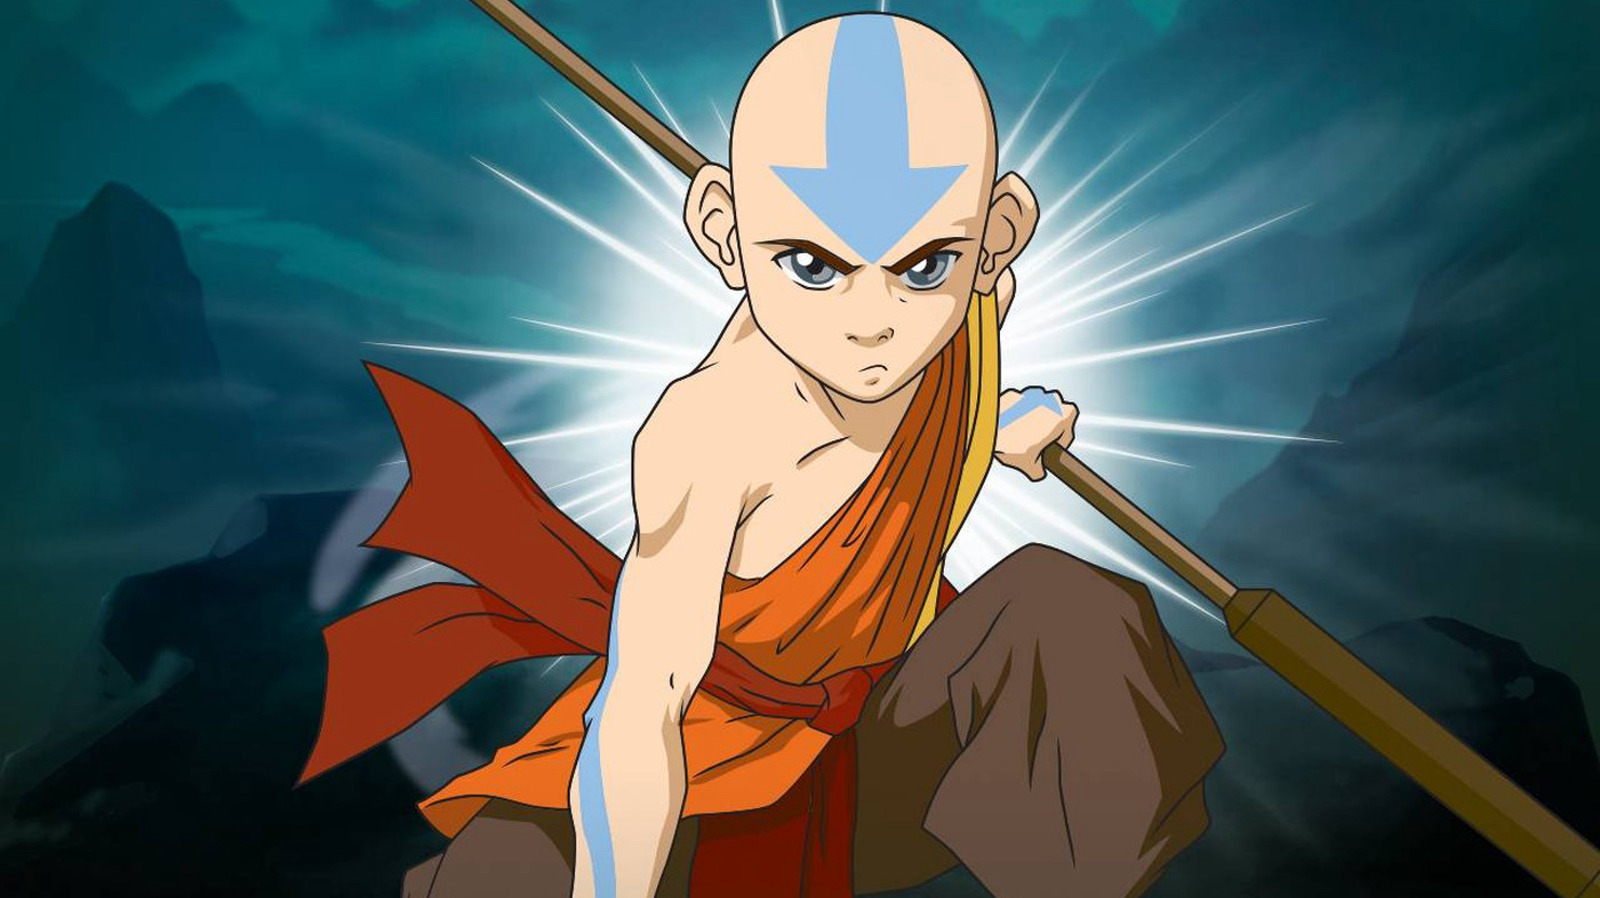 Avatar The Last Airbender 10 Most Beautiful Moments Of Animation